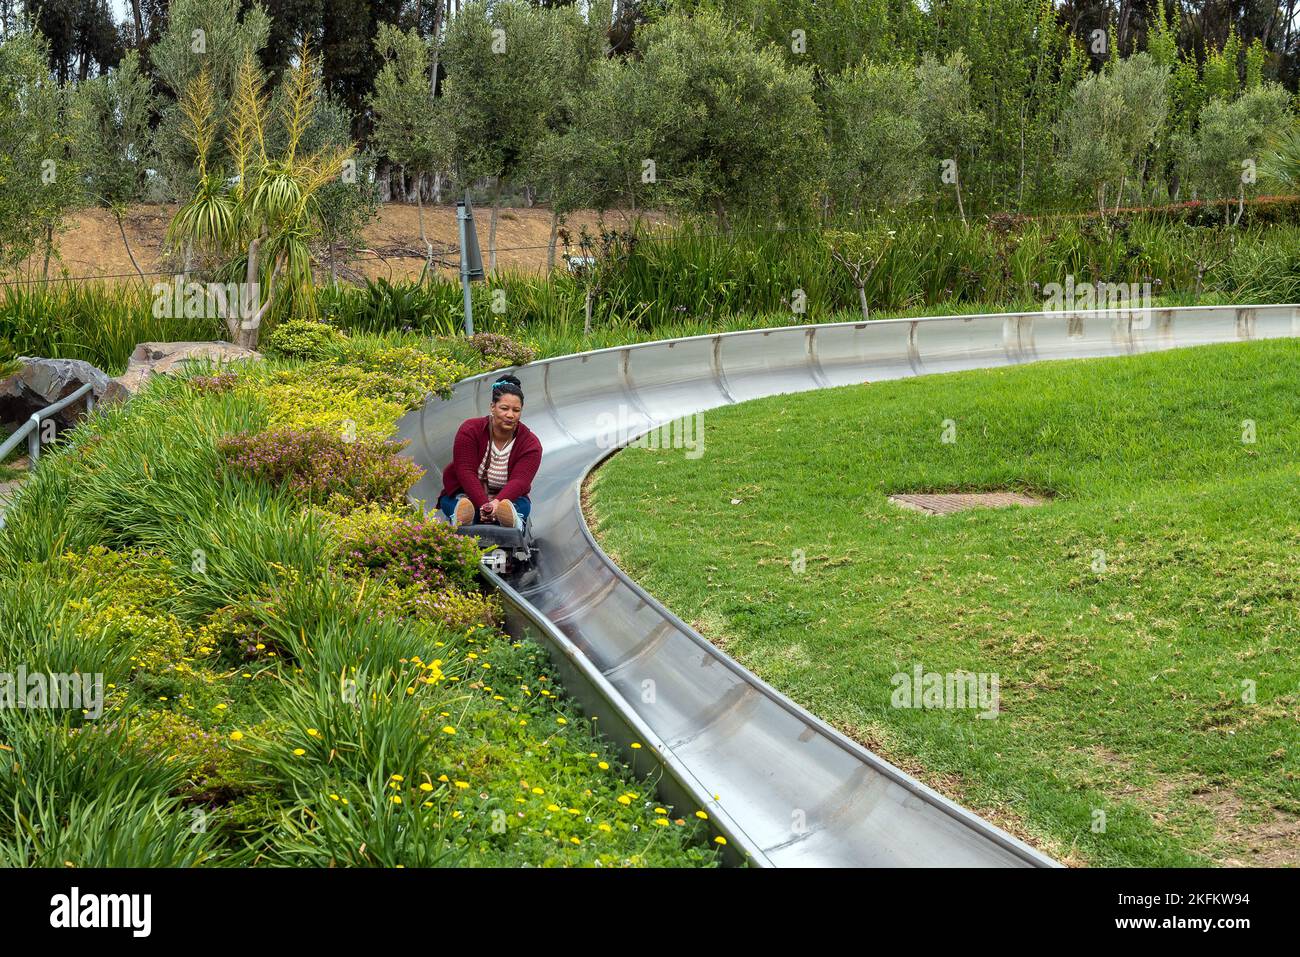 Bellville, South Africa - Sep 17, 2022: Tobogganing at Cool Runnings in Bellville in the Western Cape Province. A person is visible Stock Photo